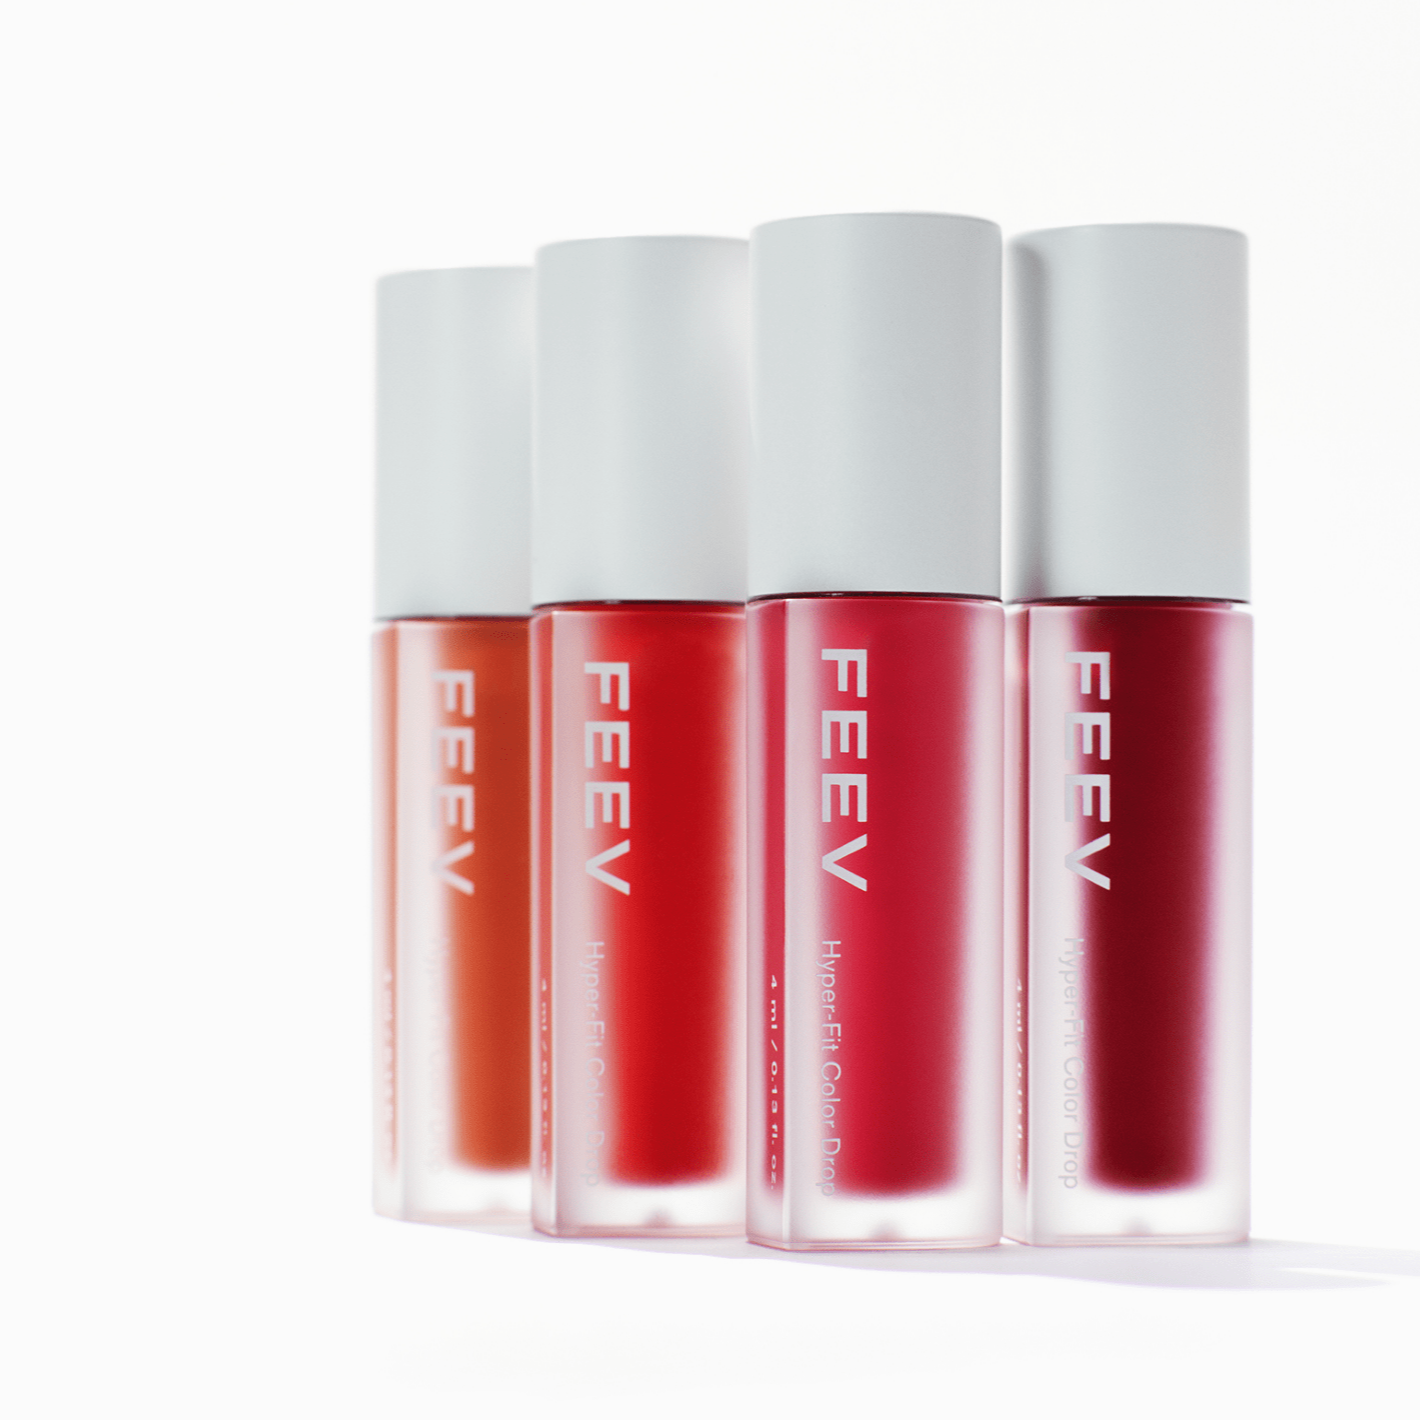 FEEV Hyper-Fit Color Drop Tint on sales on our Website !